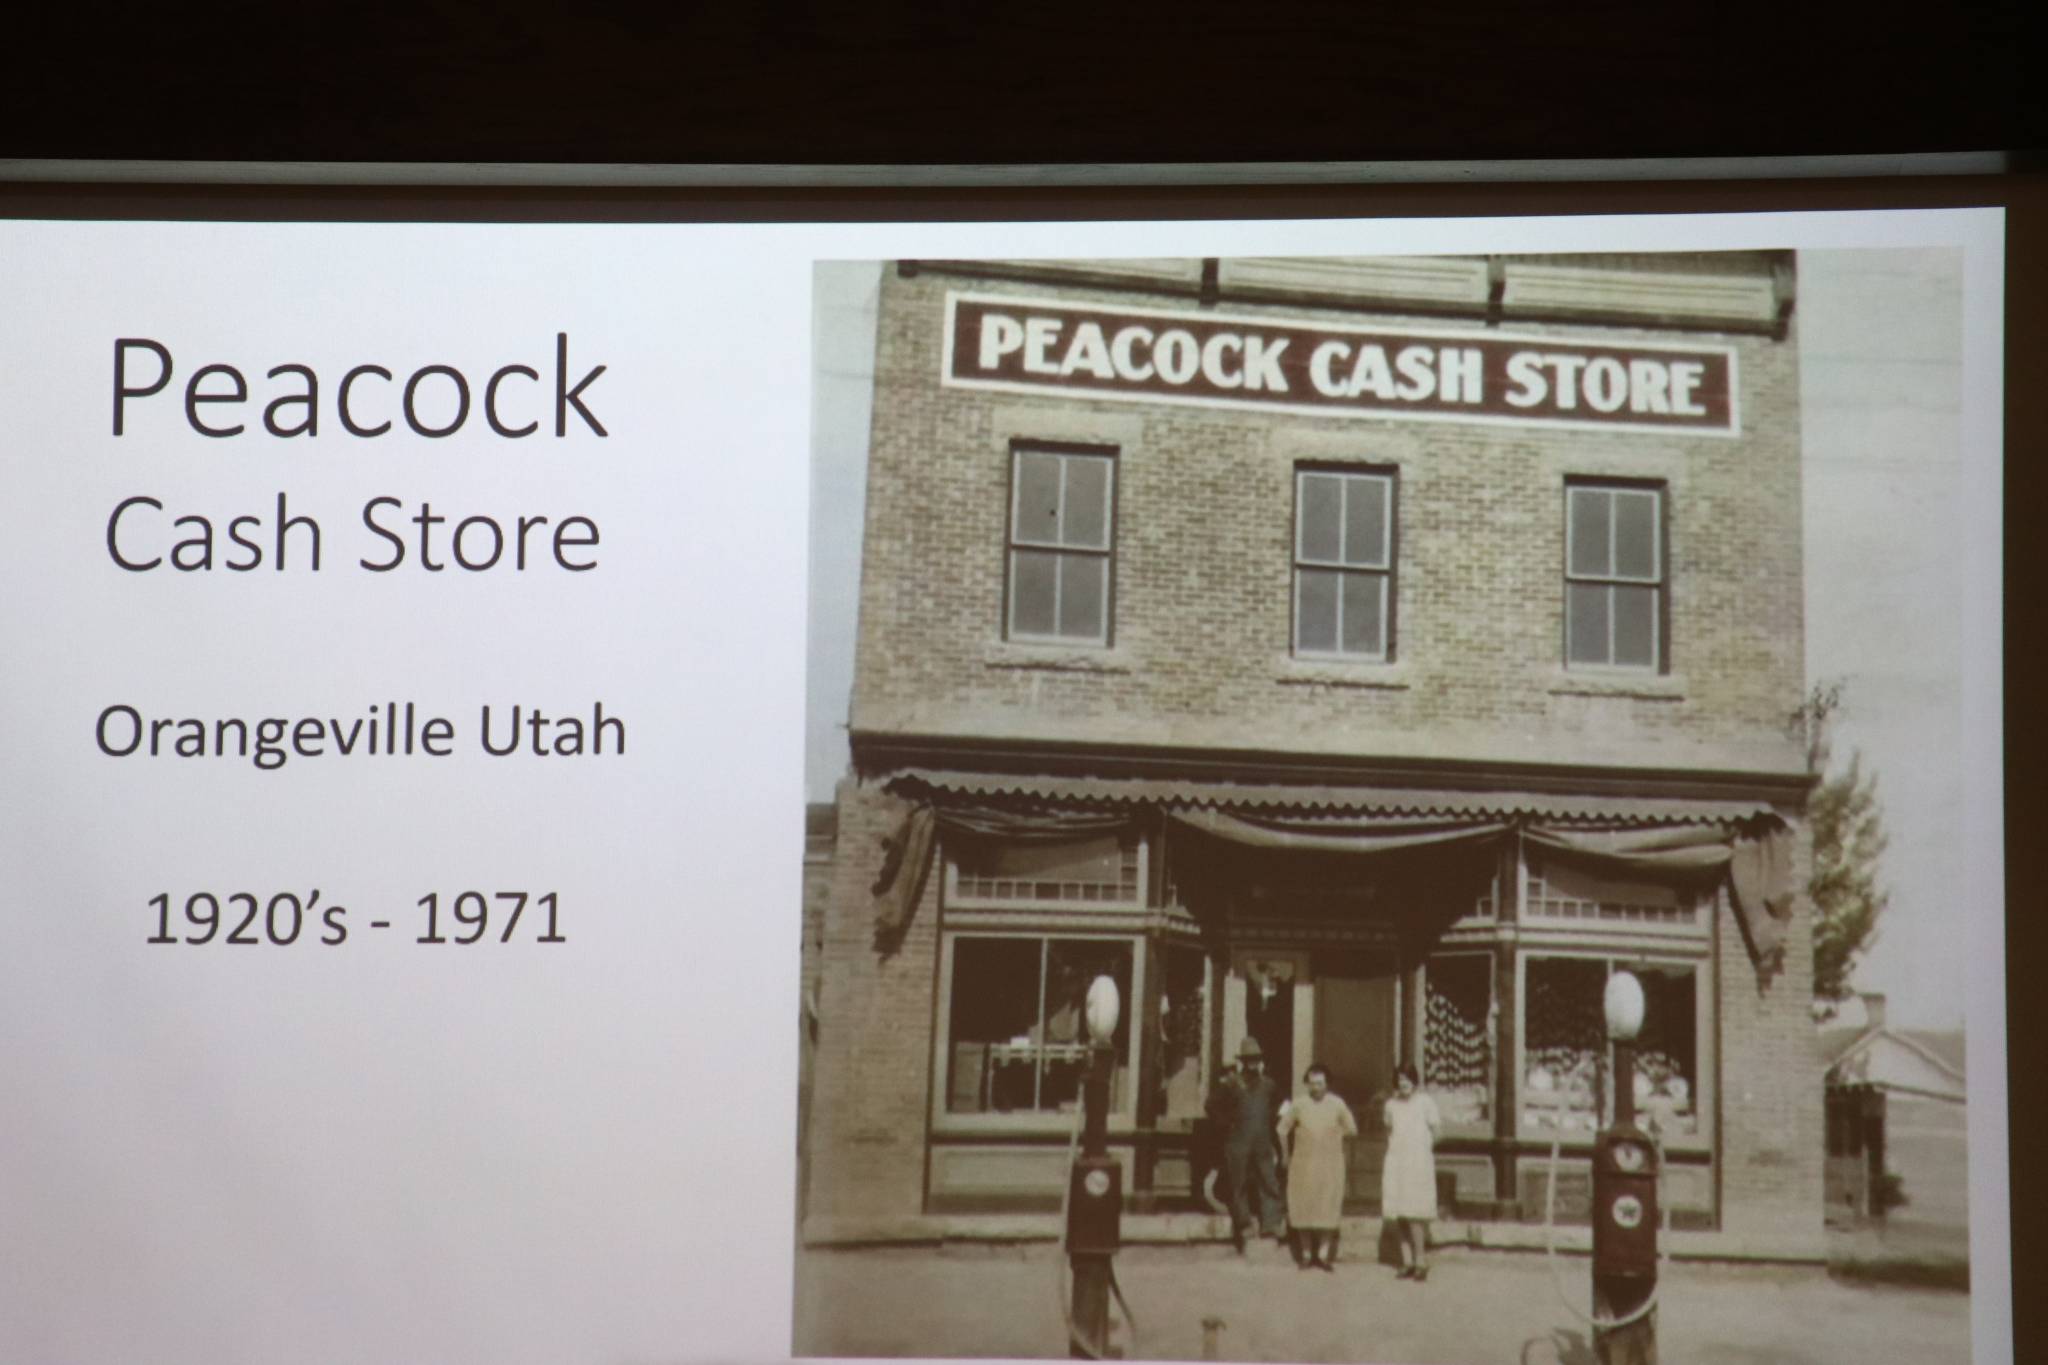 ECHS Learns History of the Peacock Cash Store